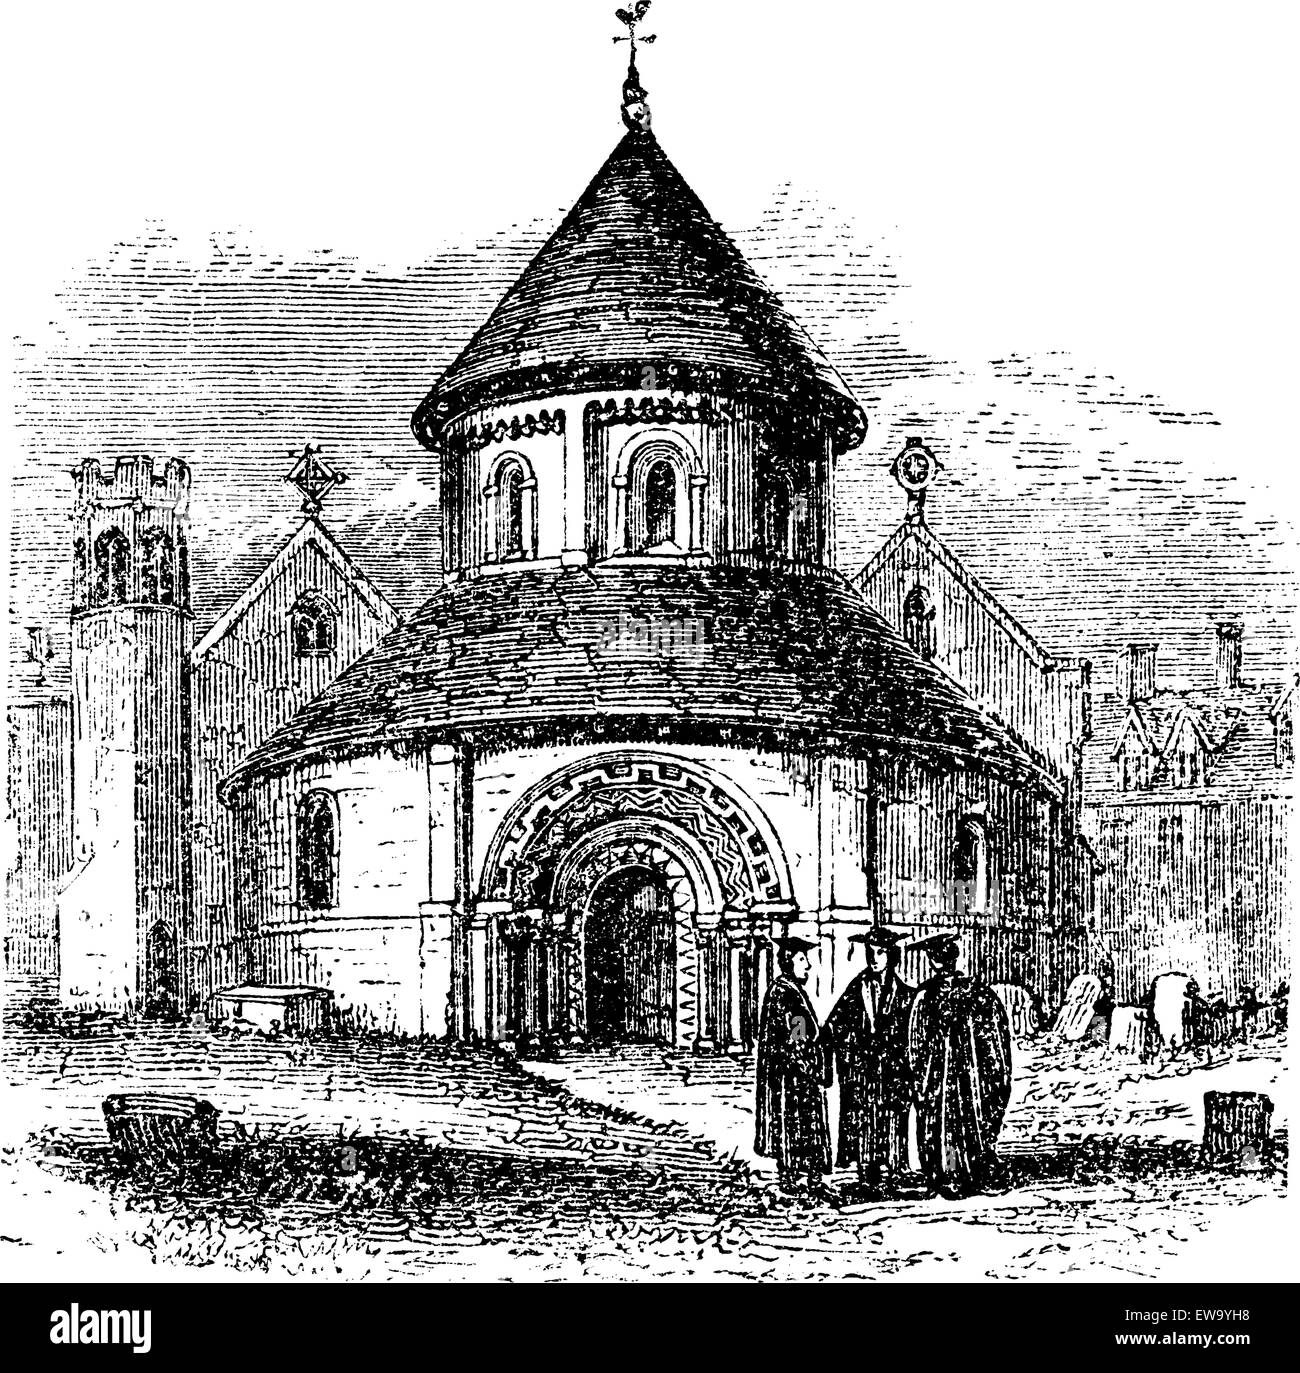 Church of the Holy Sepulchre, Cambridge, United Kingdom, vintage engraving. Old engraved illustration of the Church of the Holy Sepulchre with thre scholars standing in front of it, 1890sé Stock Vector